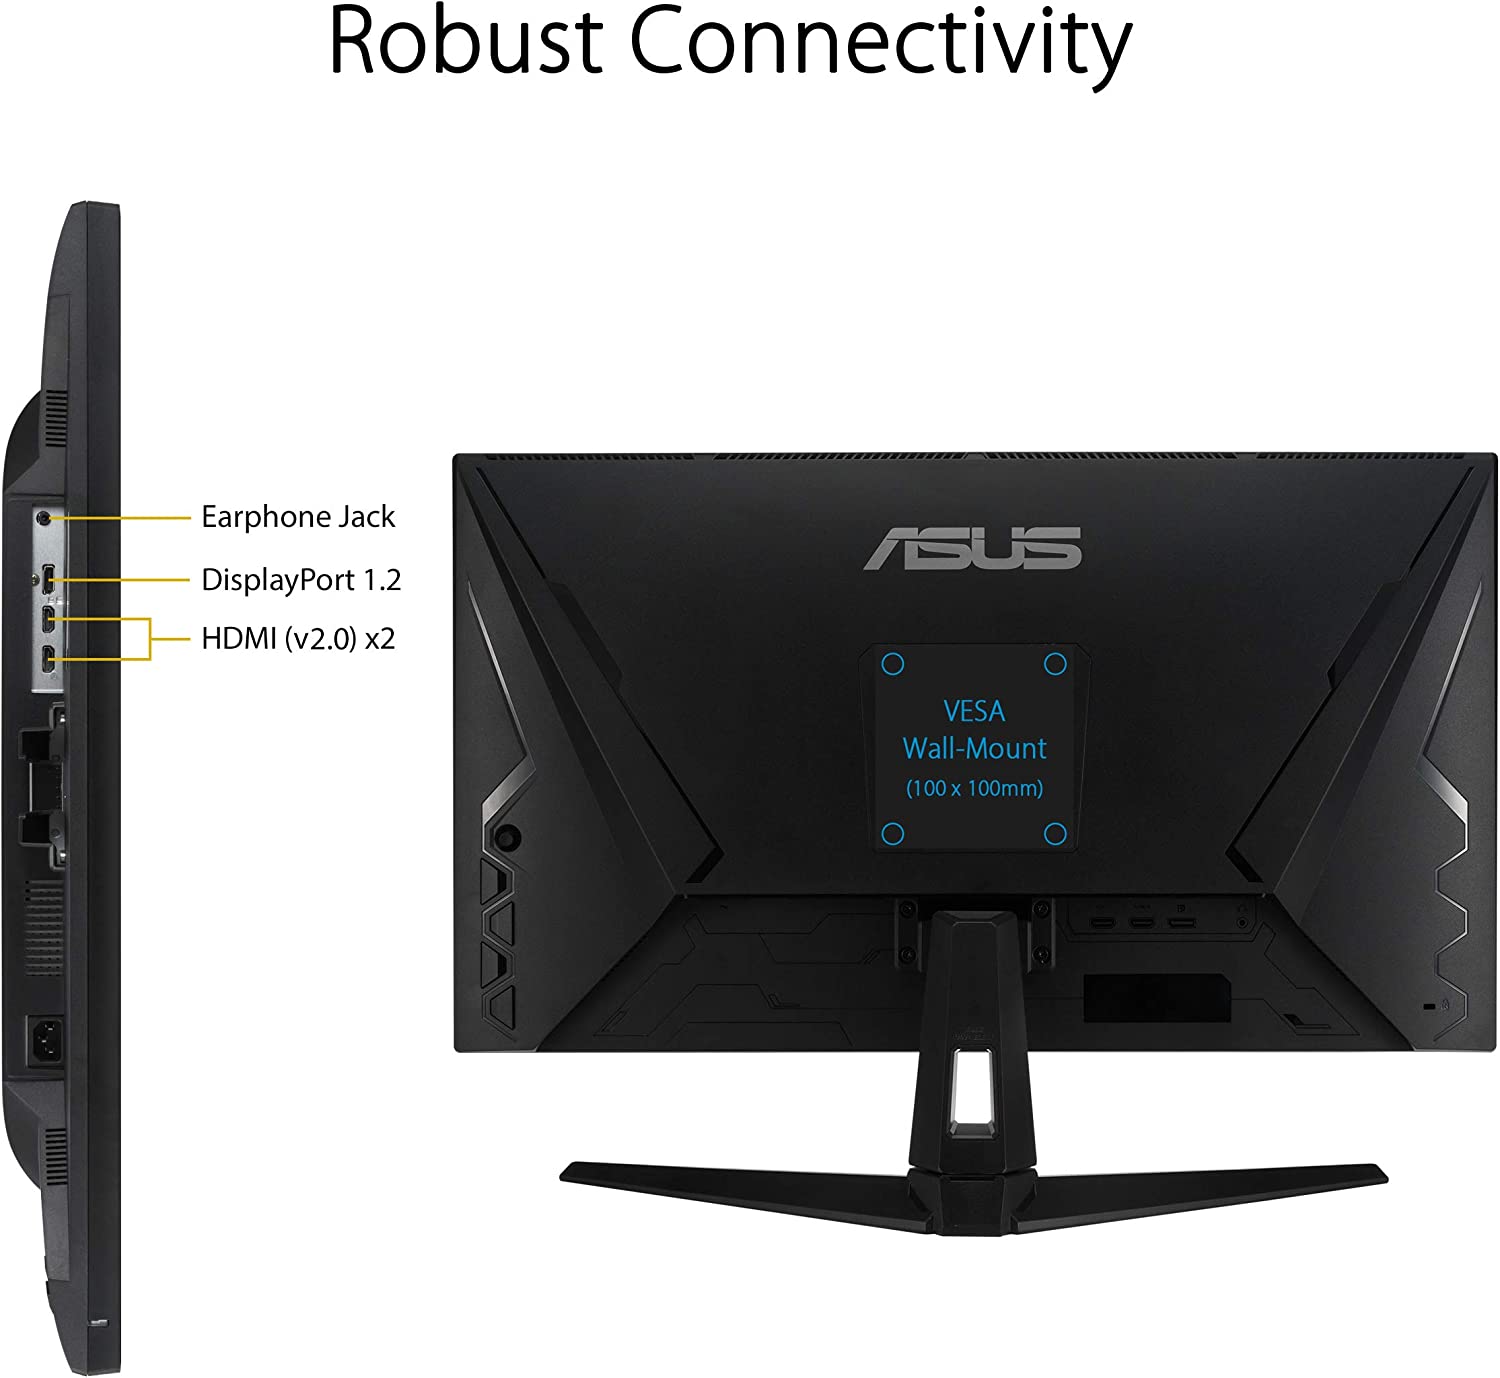 Review of the Asus TUF Gaming VG289Q